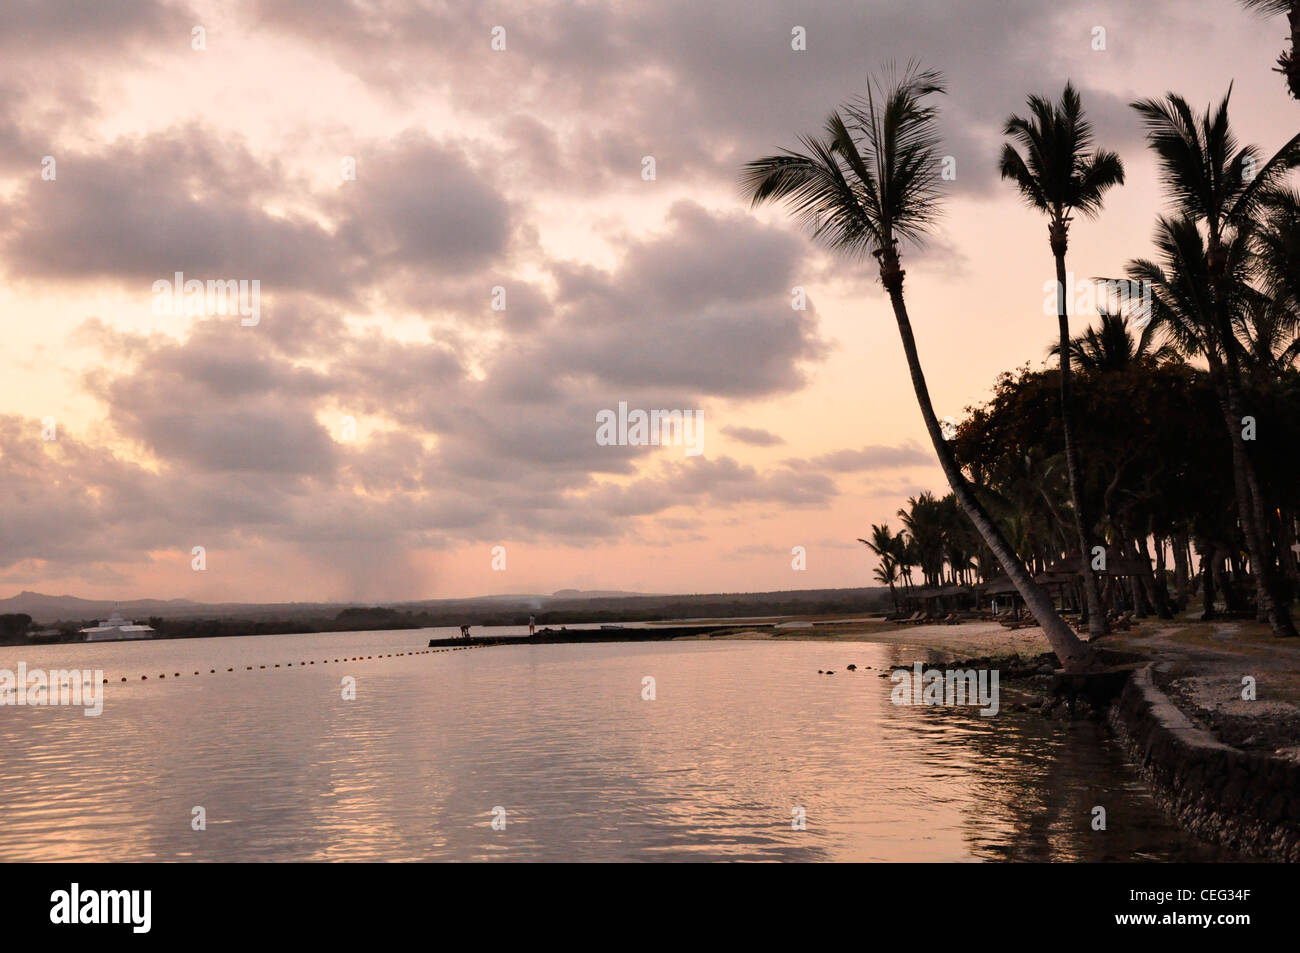 Dusk Sky Pink Sub tropical reflections in water palms in silhouette Stock Photo